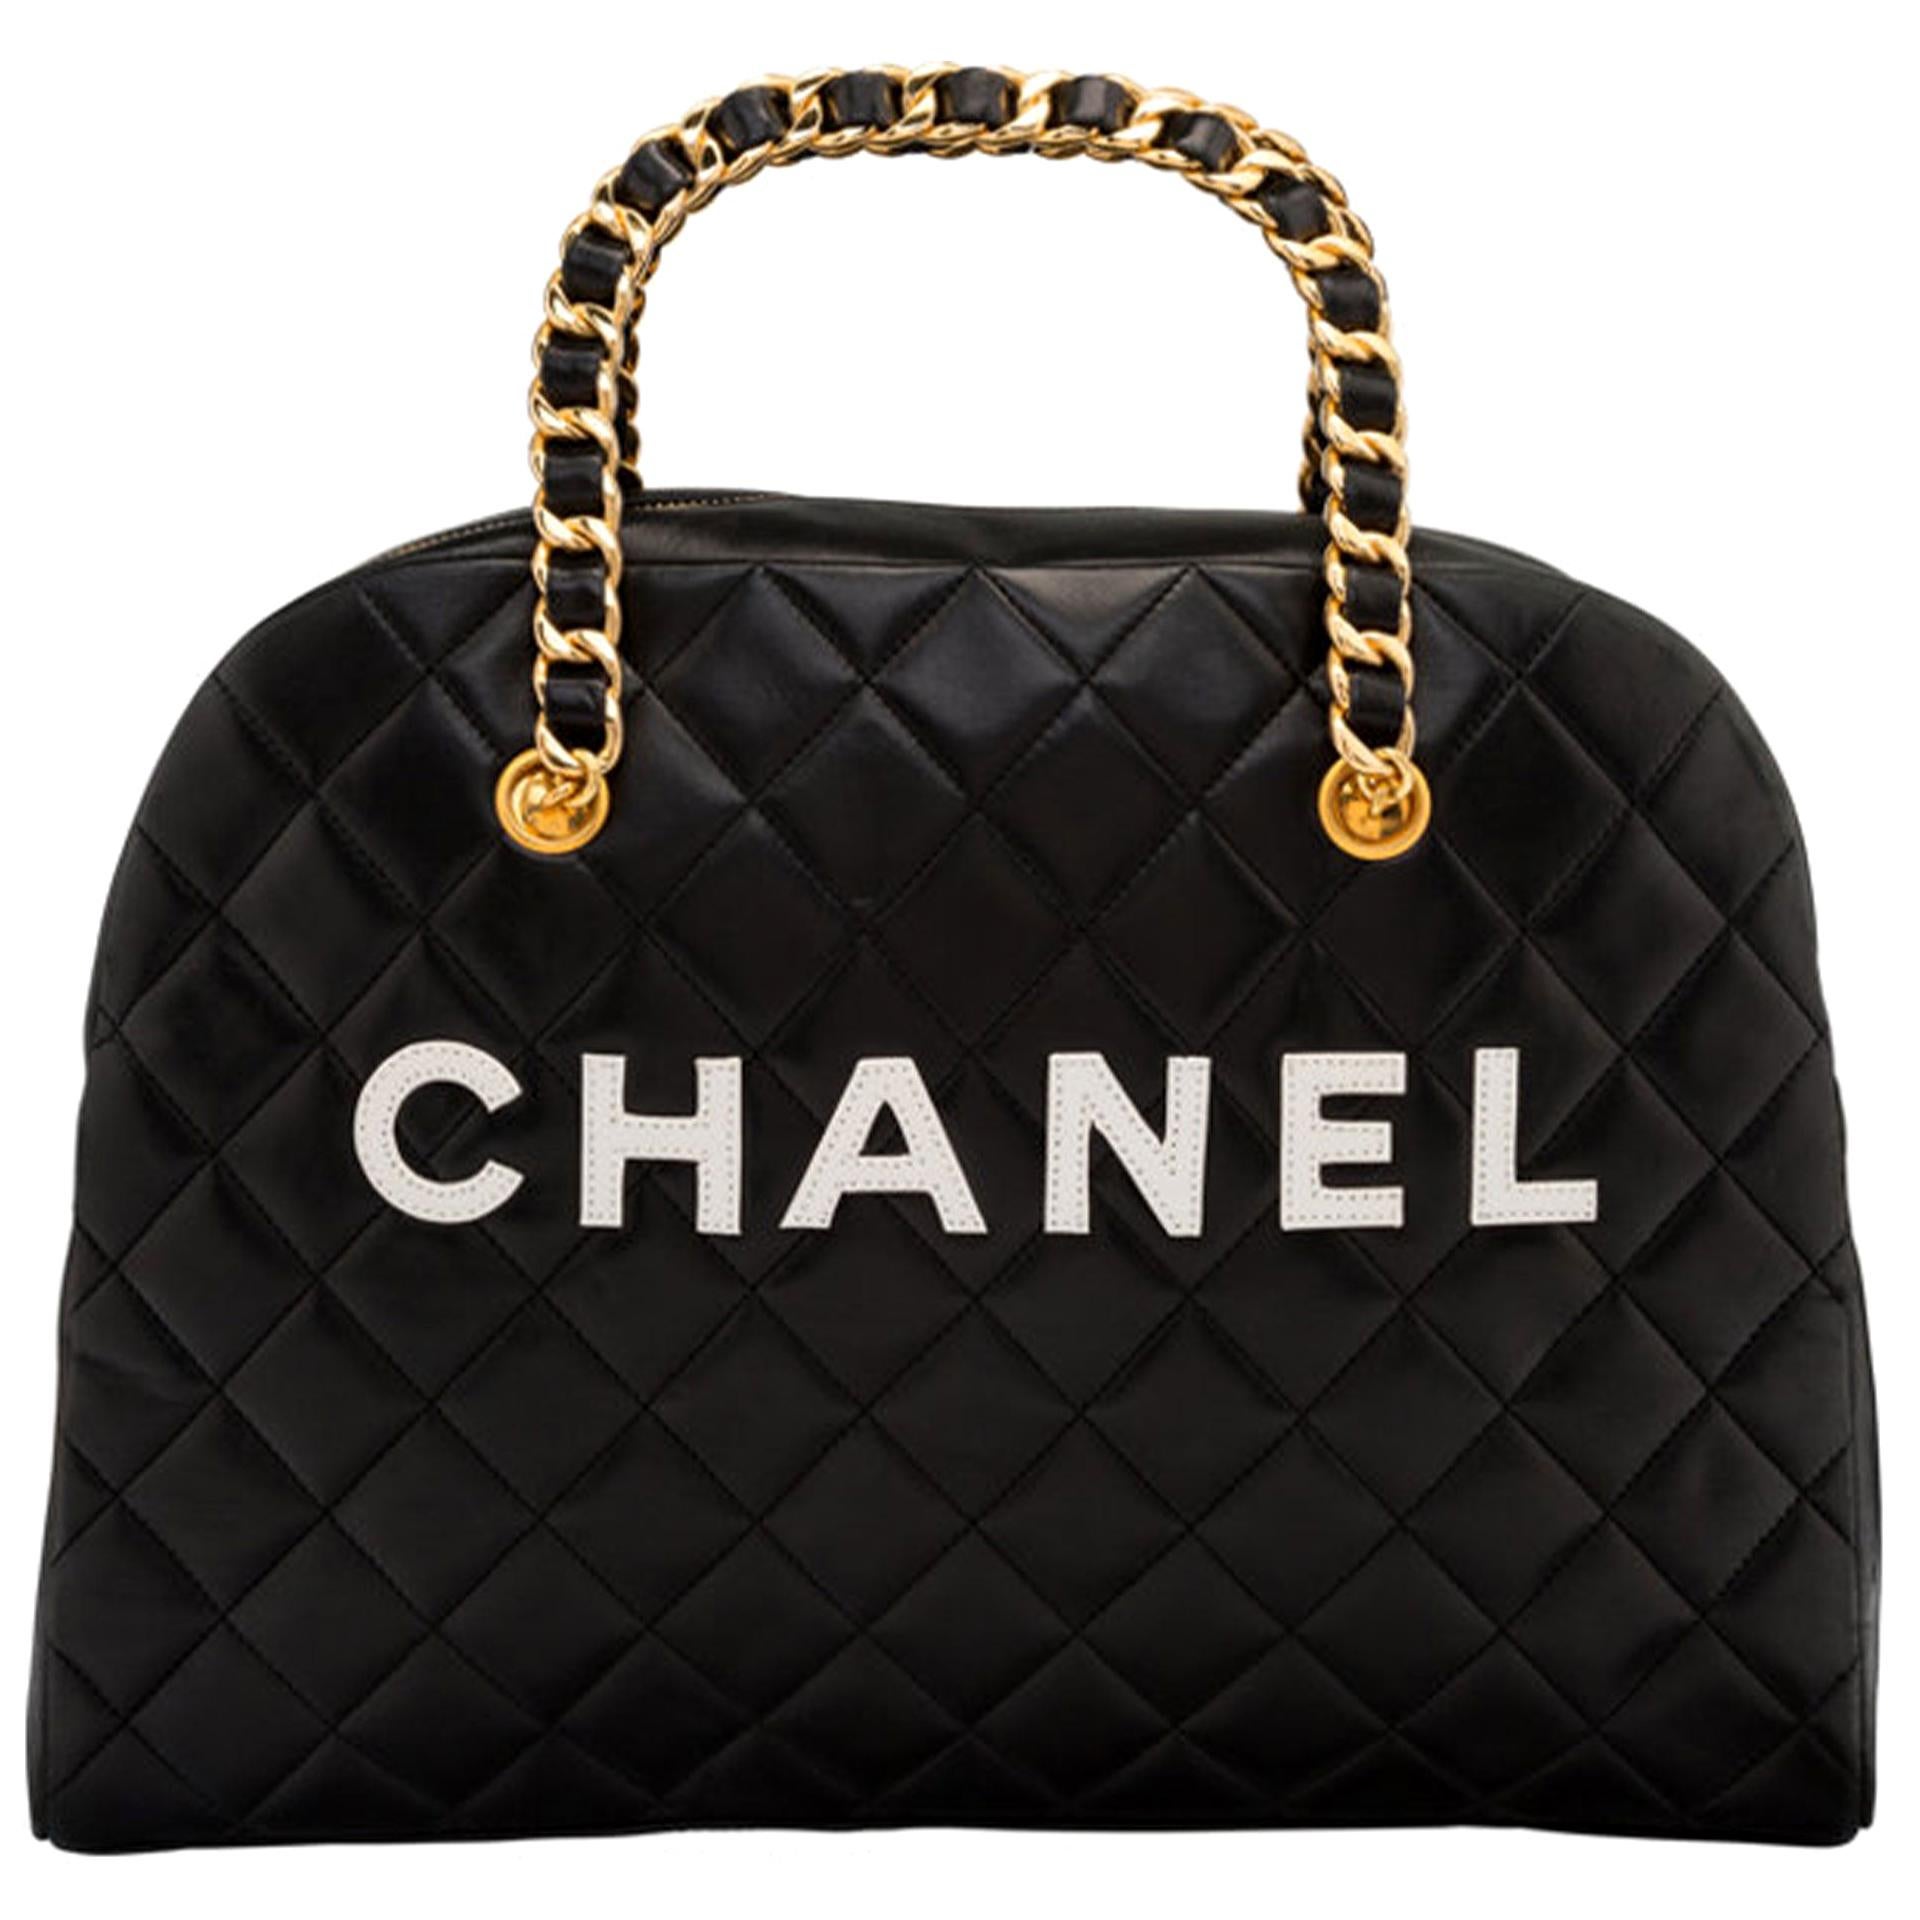 Chanel Vintage Black Quilted Lambskin Leather Medium Bowling Bag For Sale